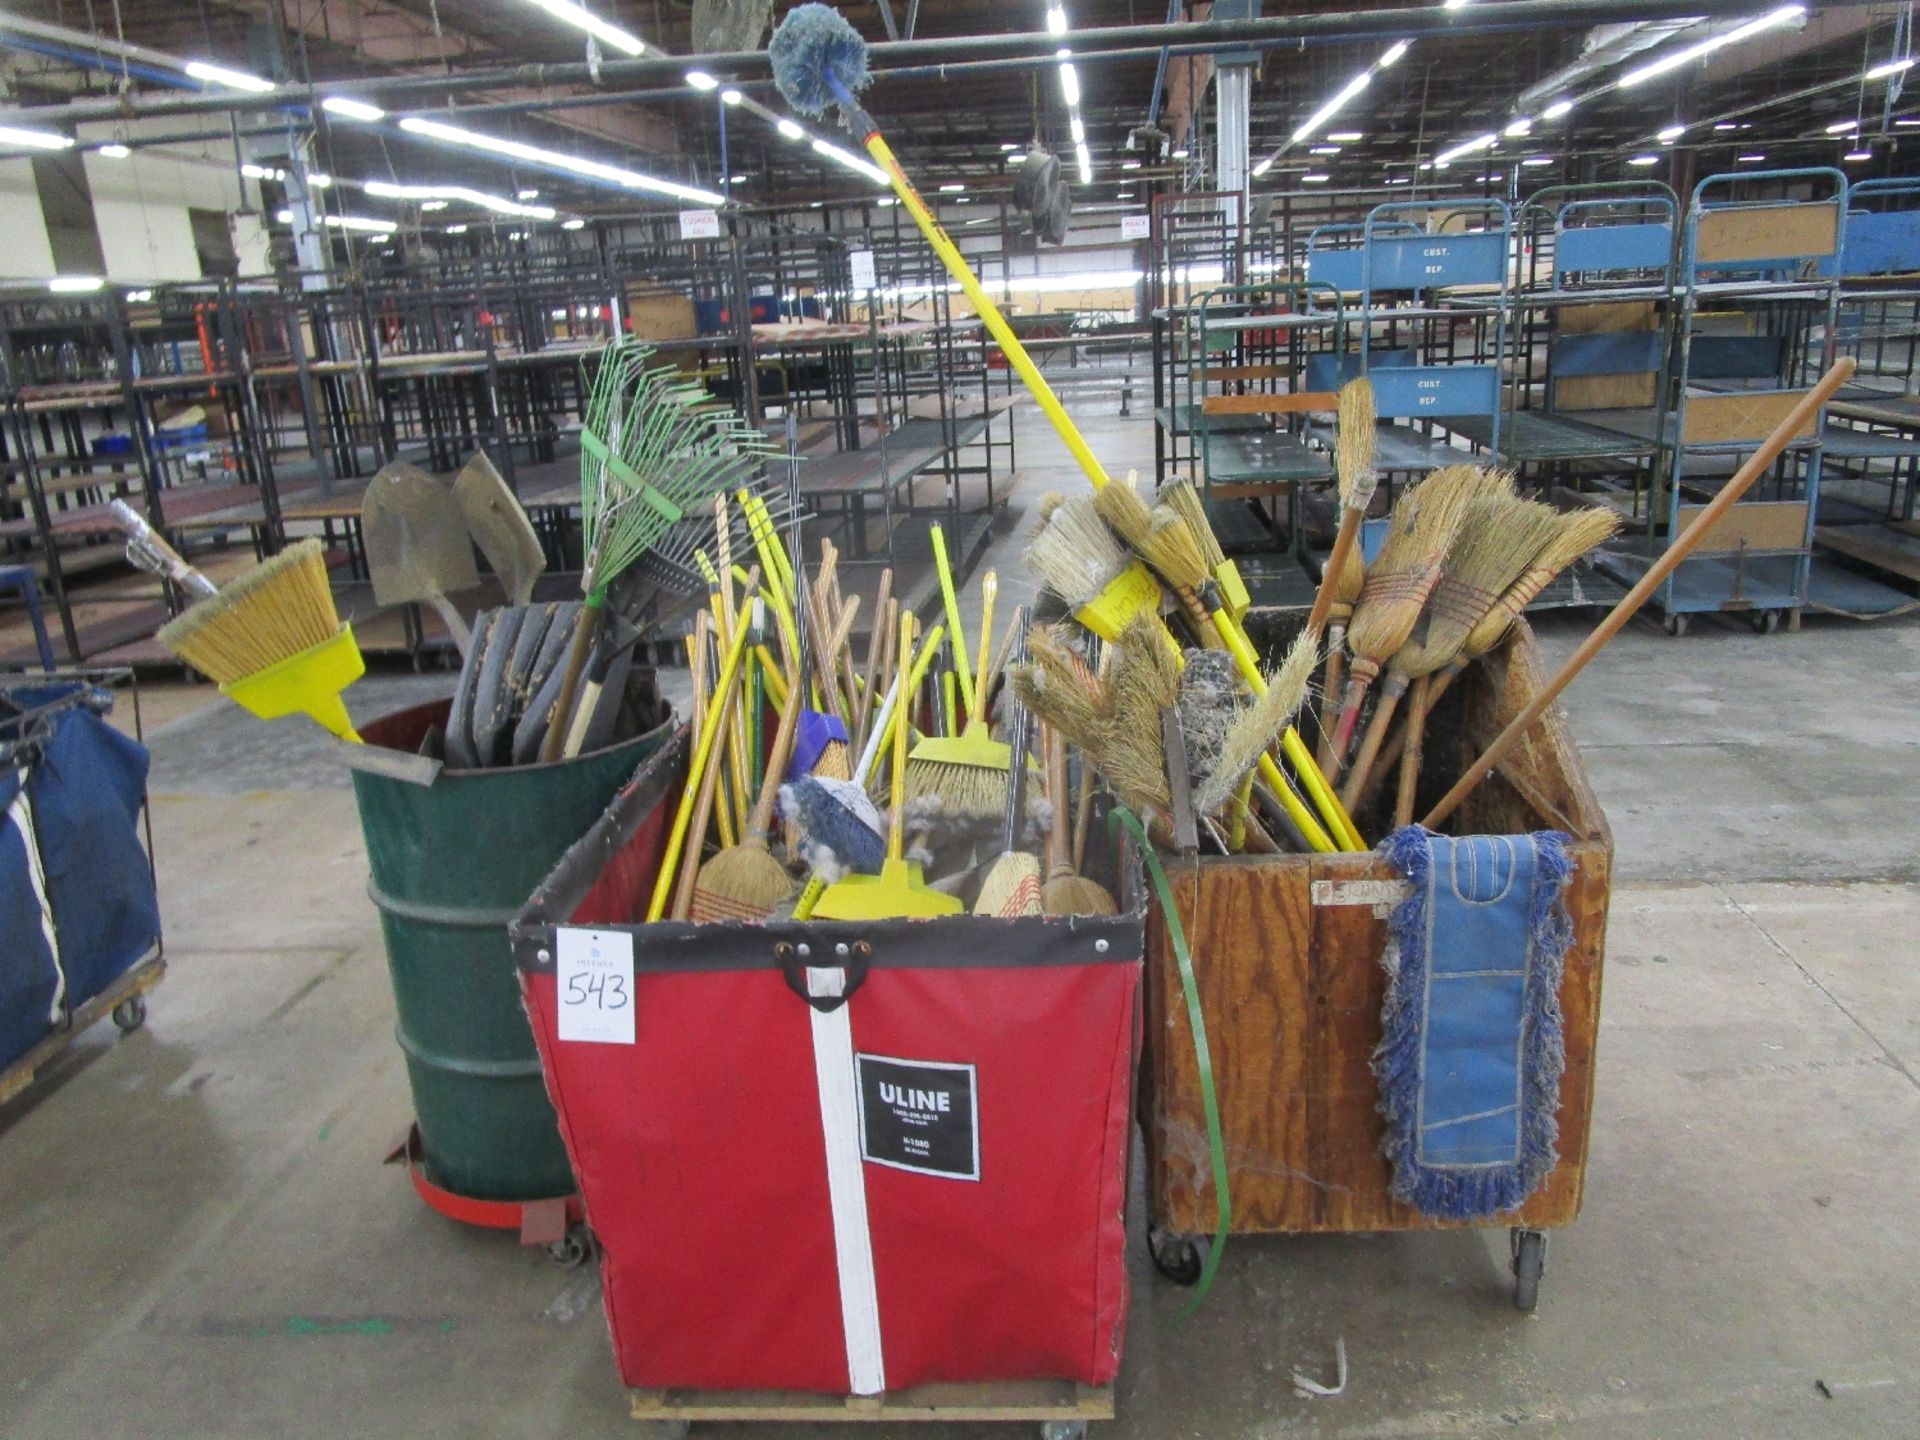 Lot of Cleaning Supplies in Uline Basket Trucks